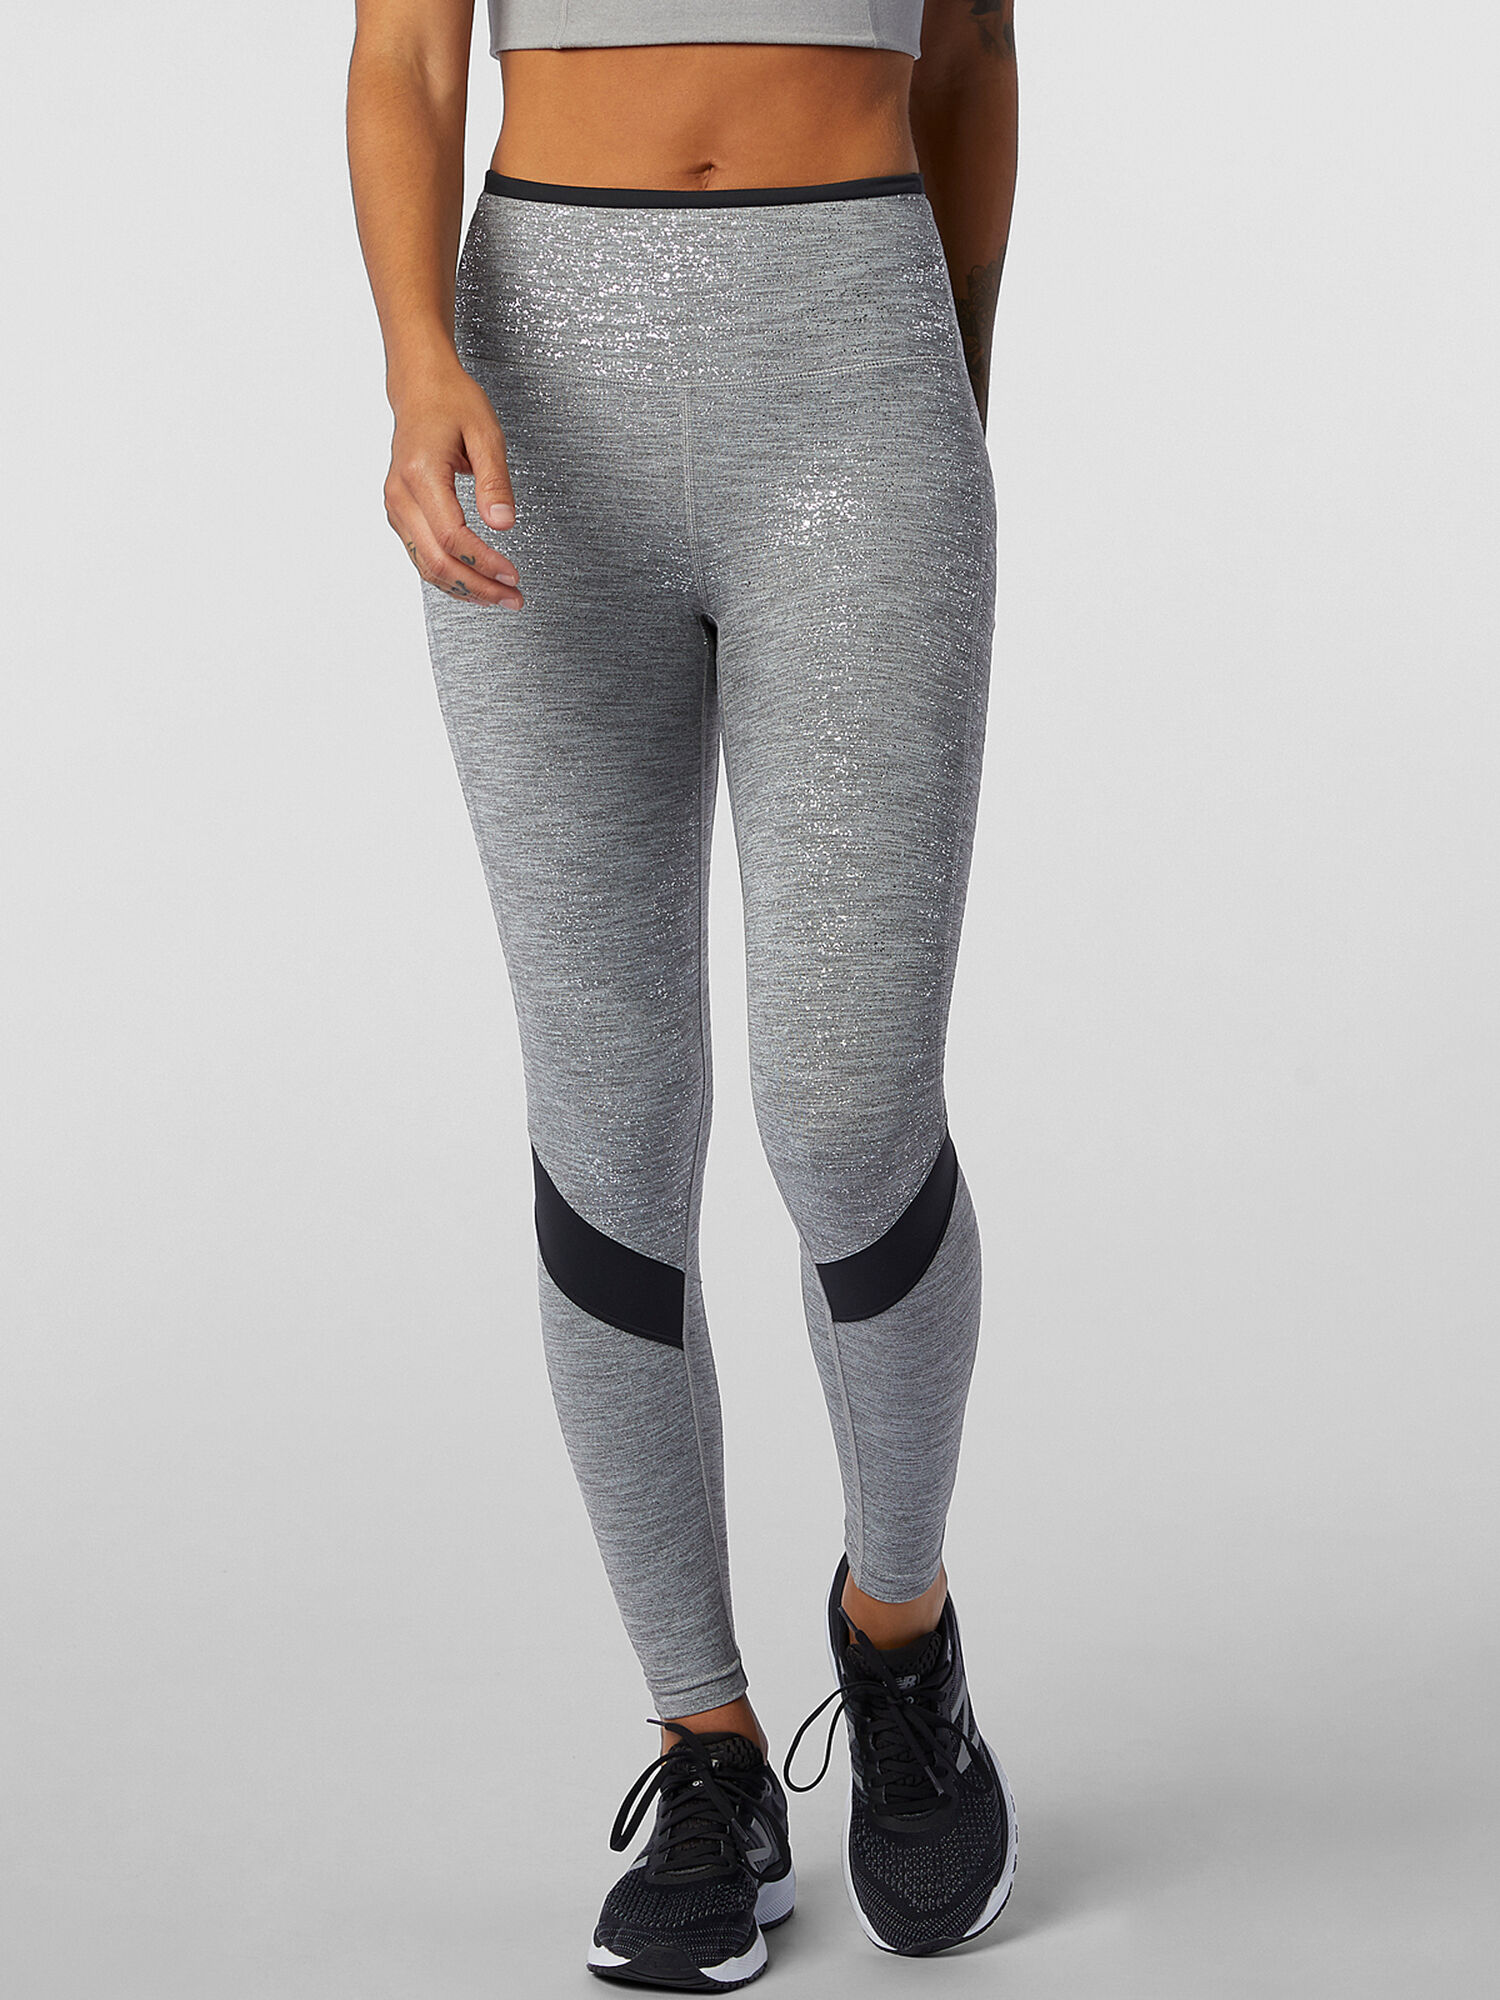 New Balance Running Tights With Pockets - Just Right | Title Nine